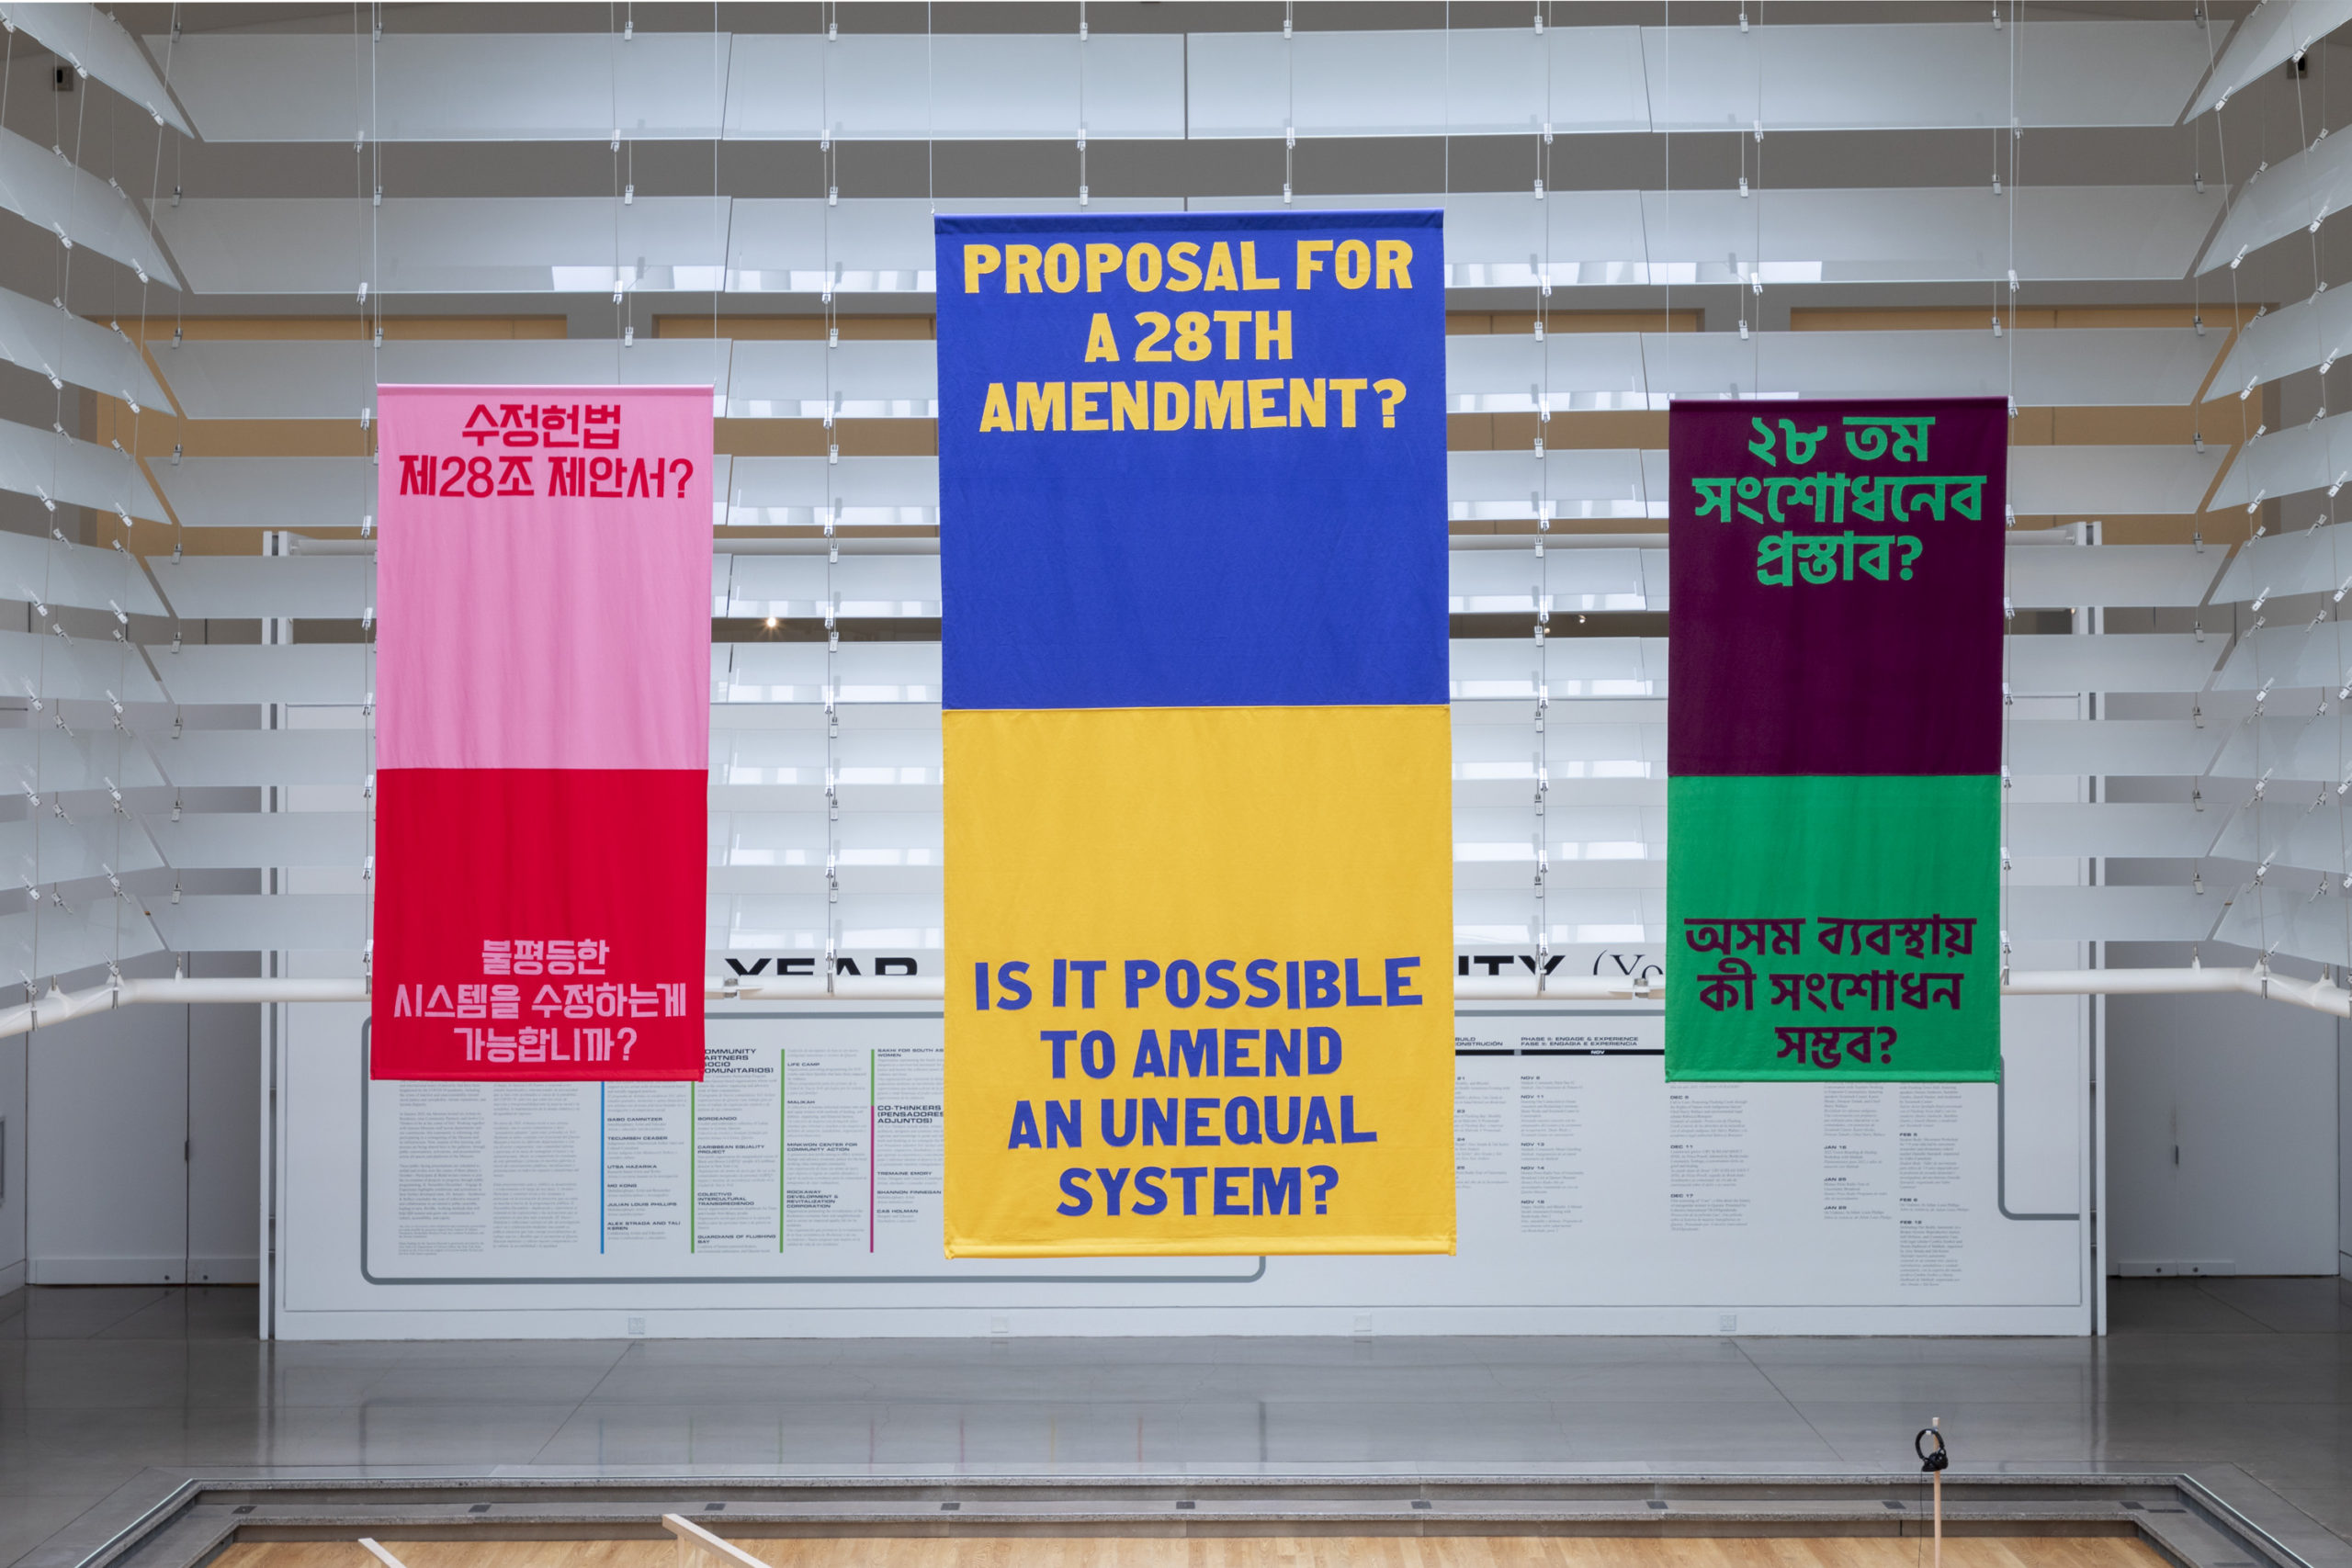 Three colorful banners hang from the ceiling reading Proposal for a 28th Amendment? And Is it possible to amend an unequal system? In Korean, English, and Bengali.